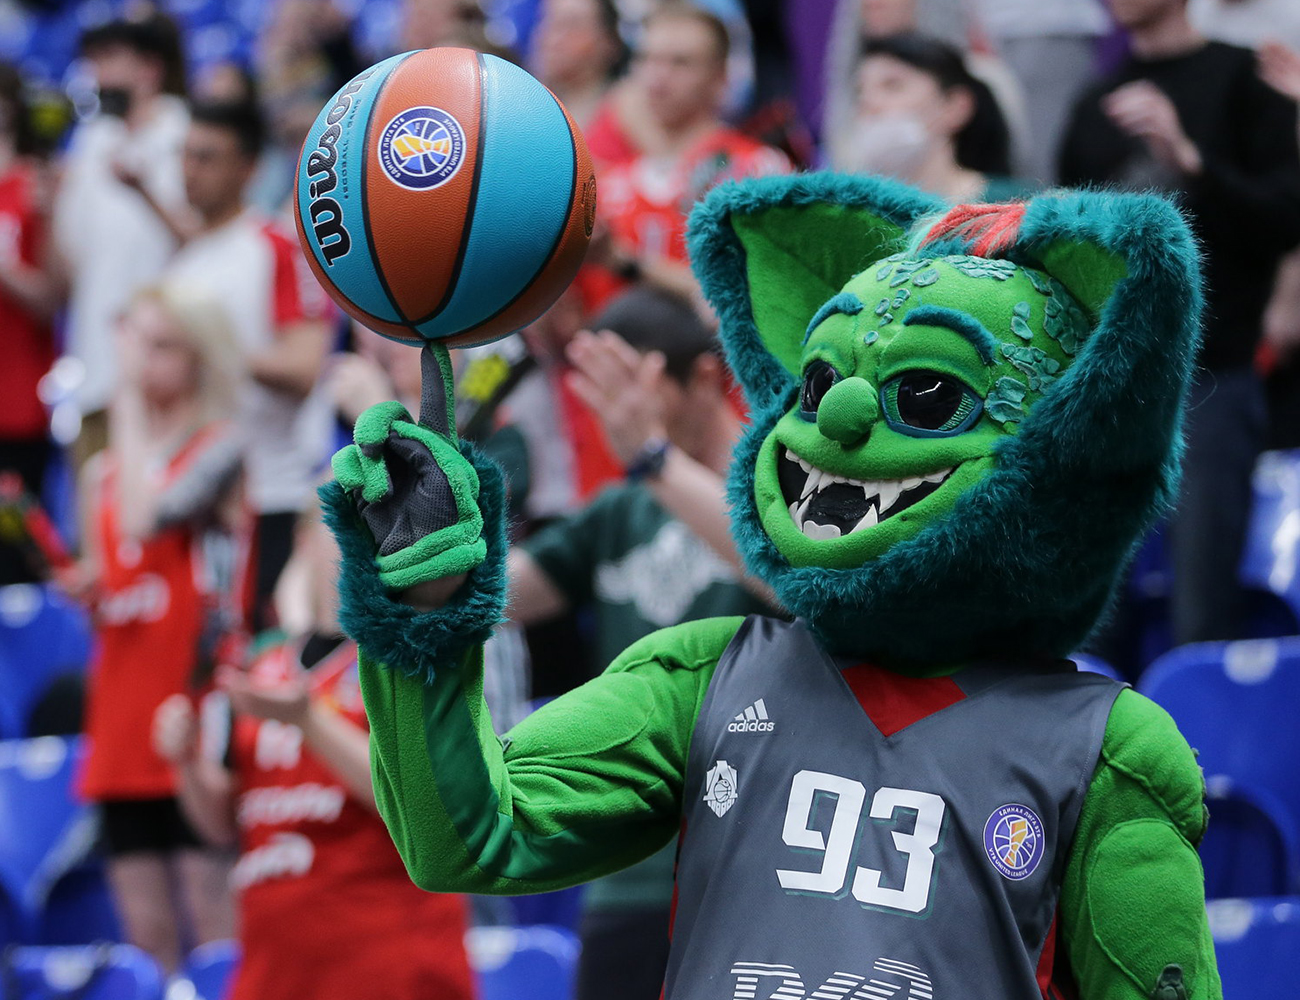 The reigning champion in Krasnodar, MBA against Enisey for the first time. Preview November 16